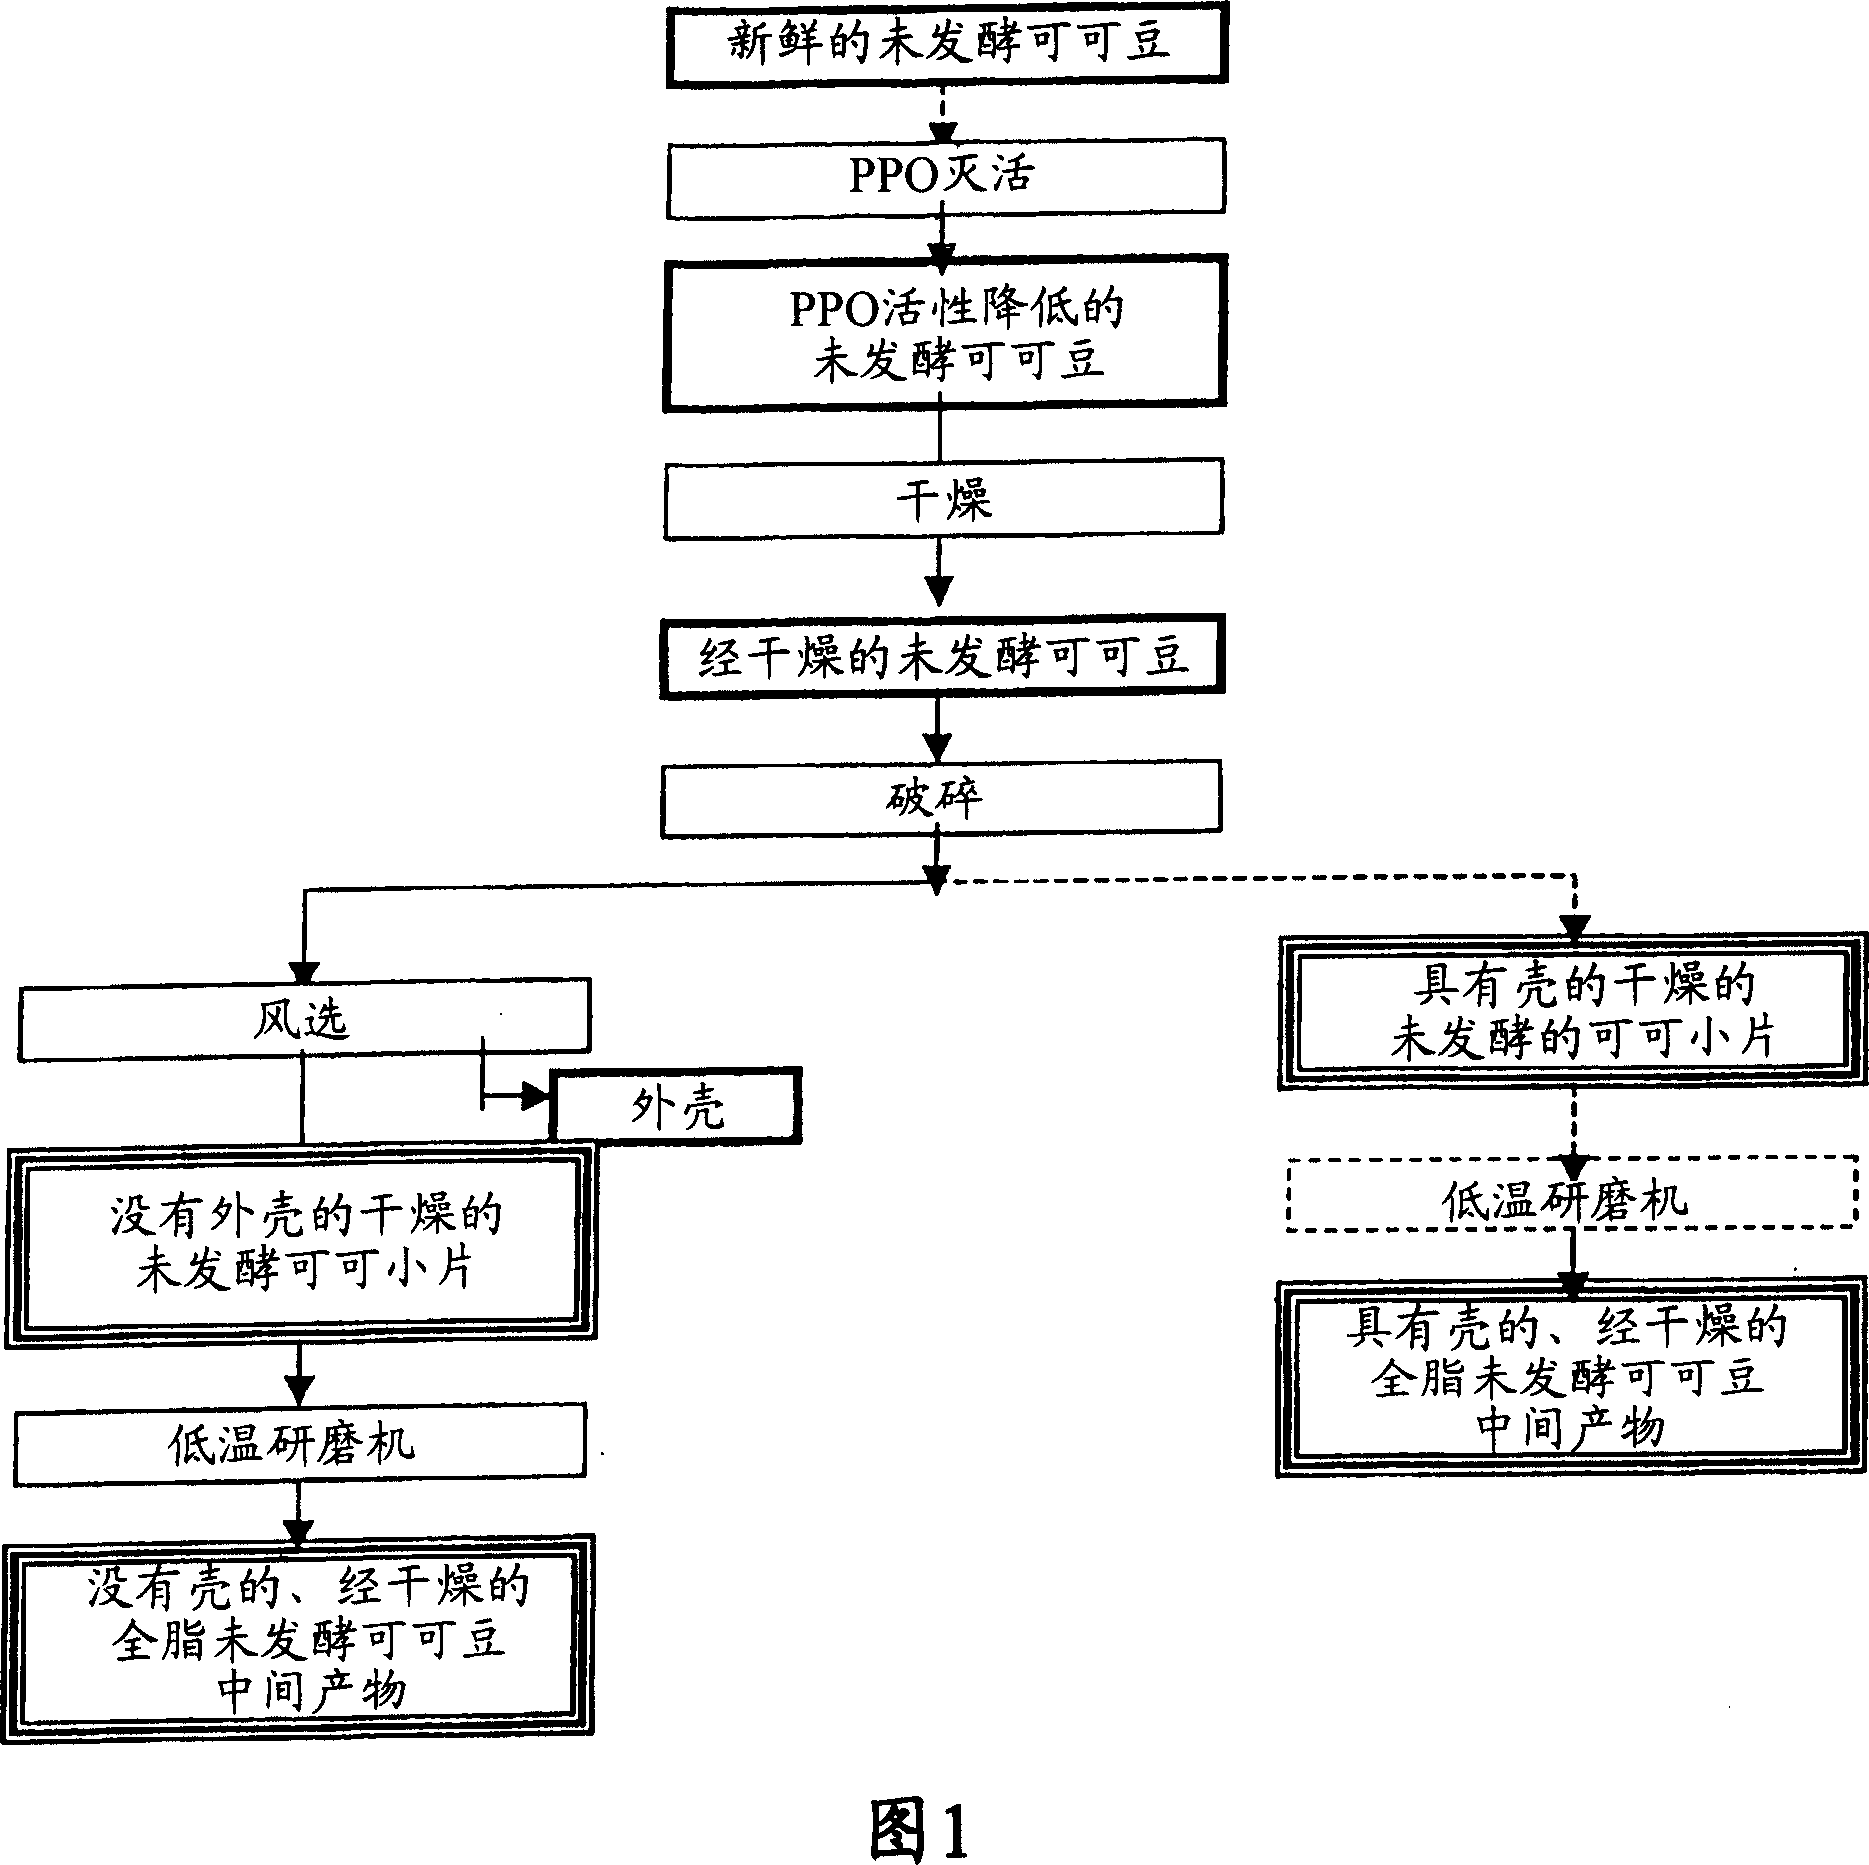 Process for producing cocoa polyphenol concentrate